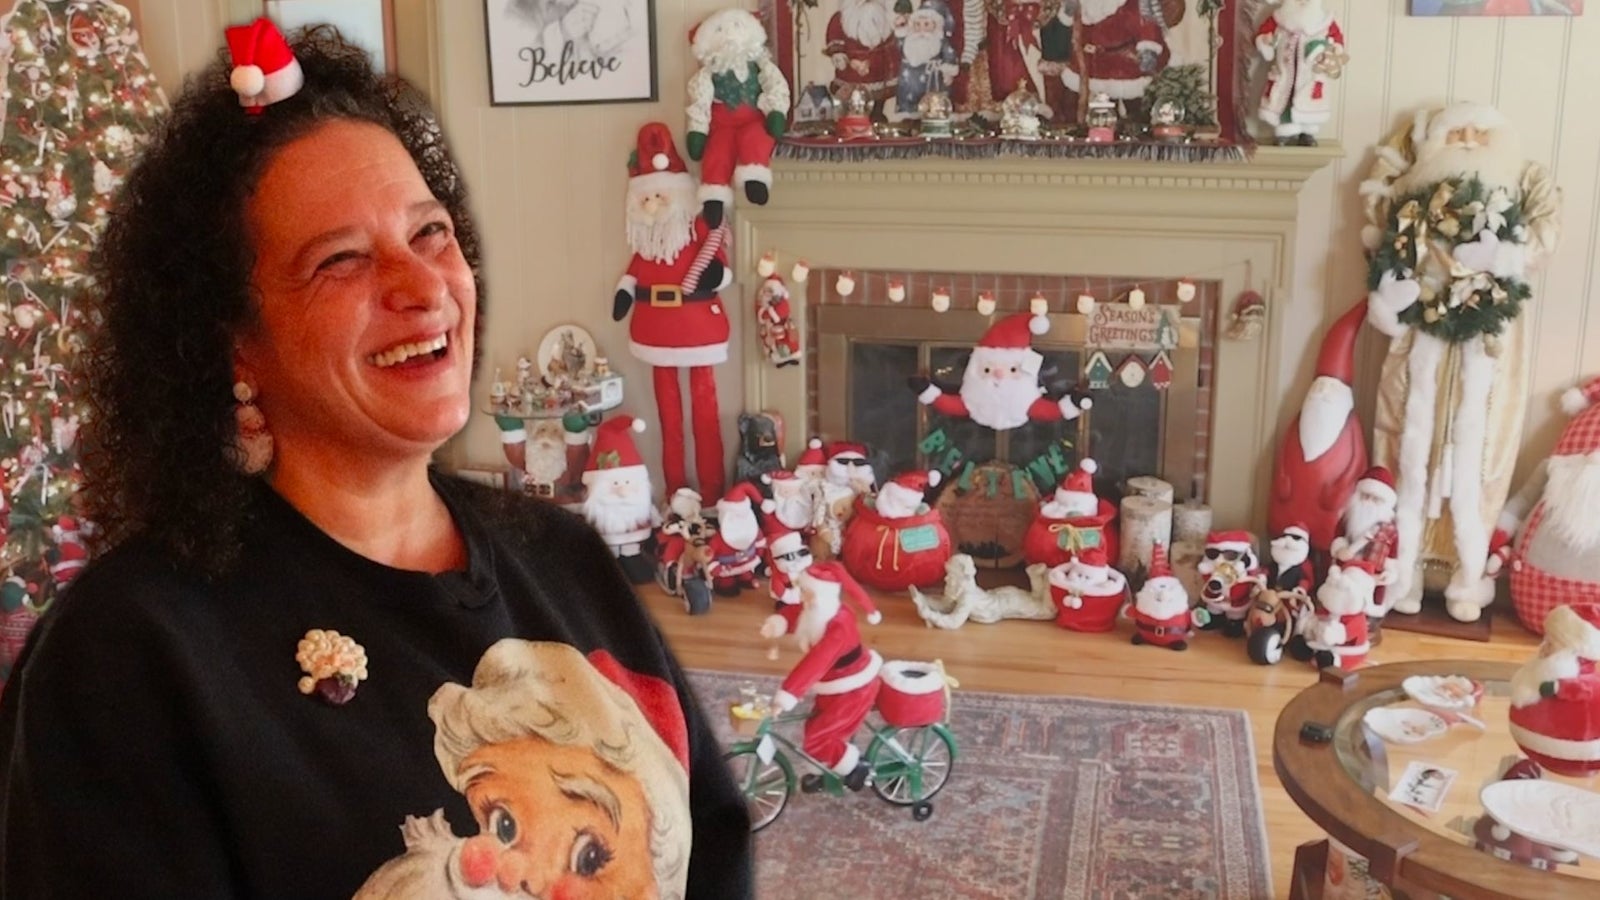 Over 500 pieces of Santa collectibles bring joy to a Delaware woman’s home